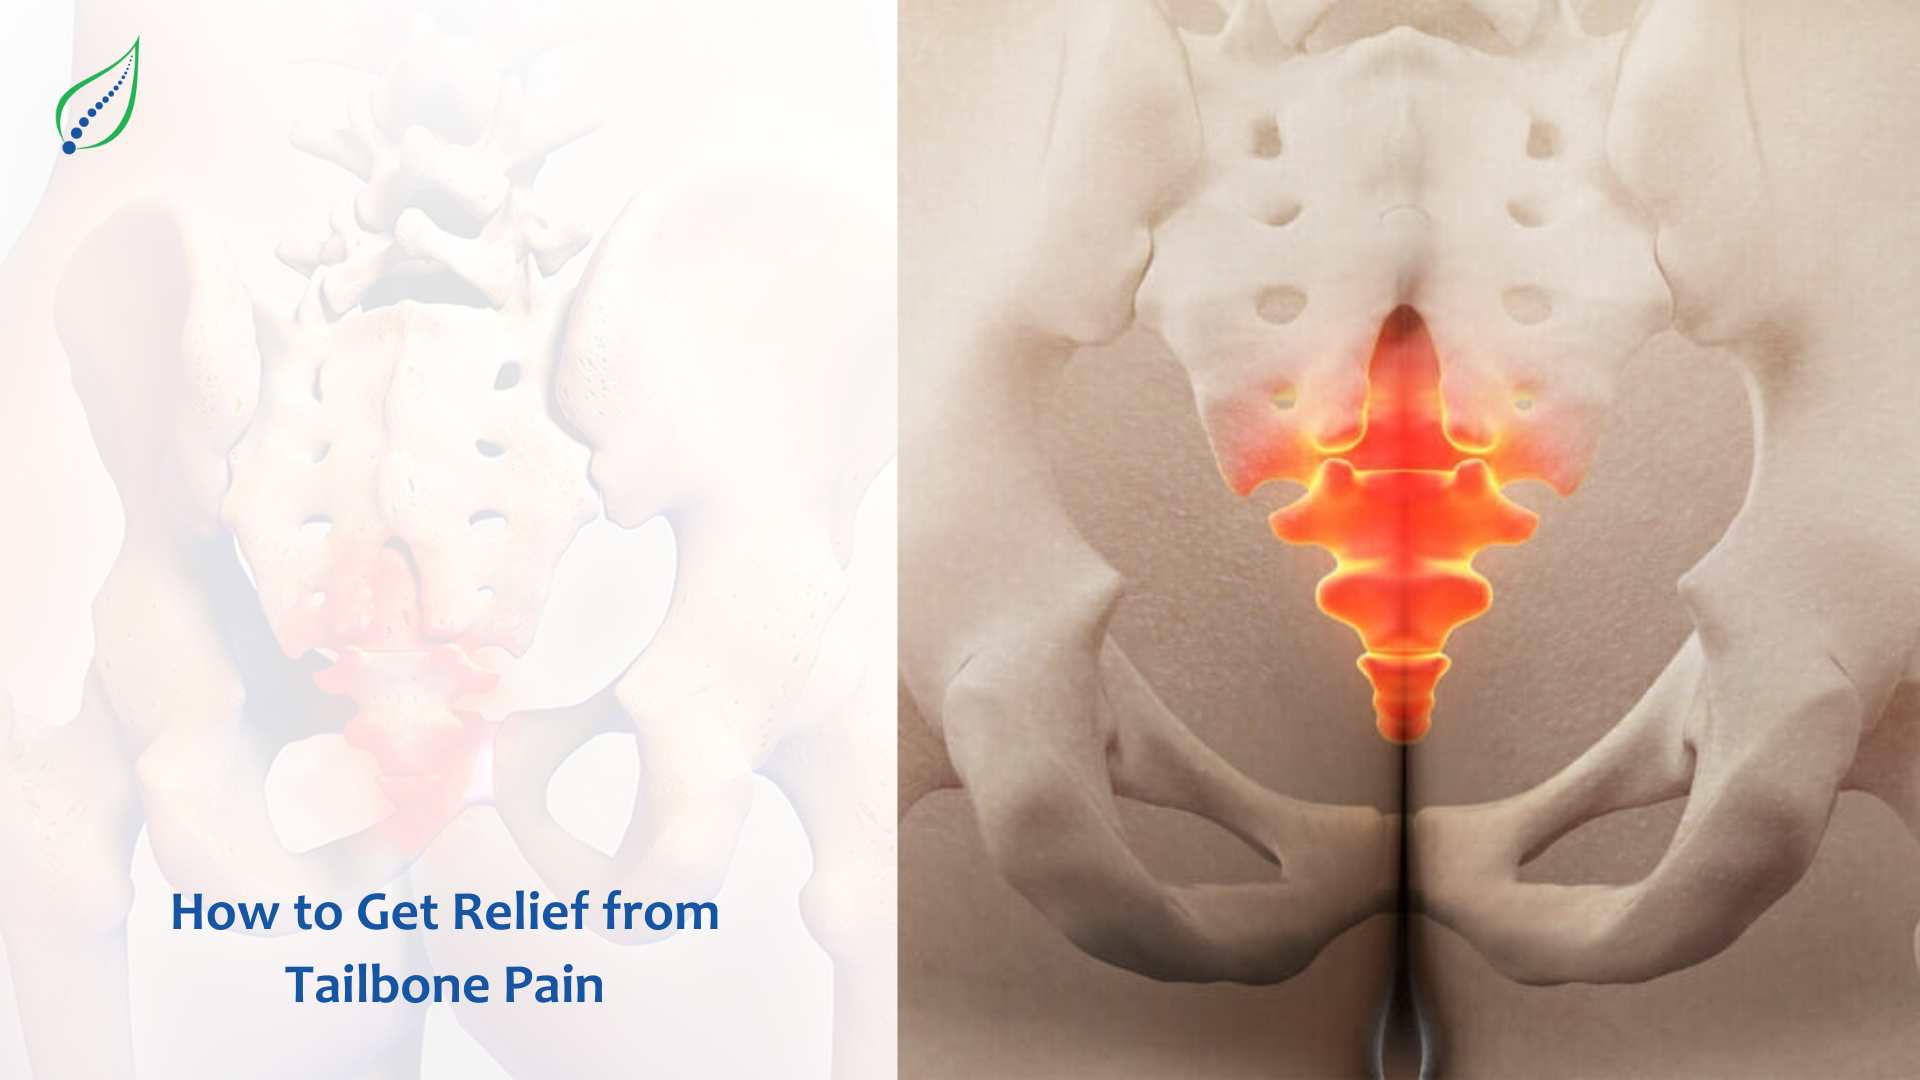 How to Get Relief from Tailbone Pain